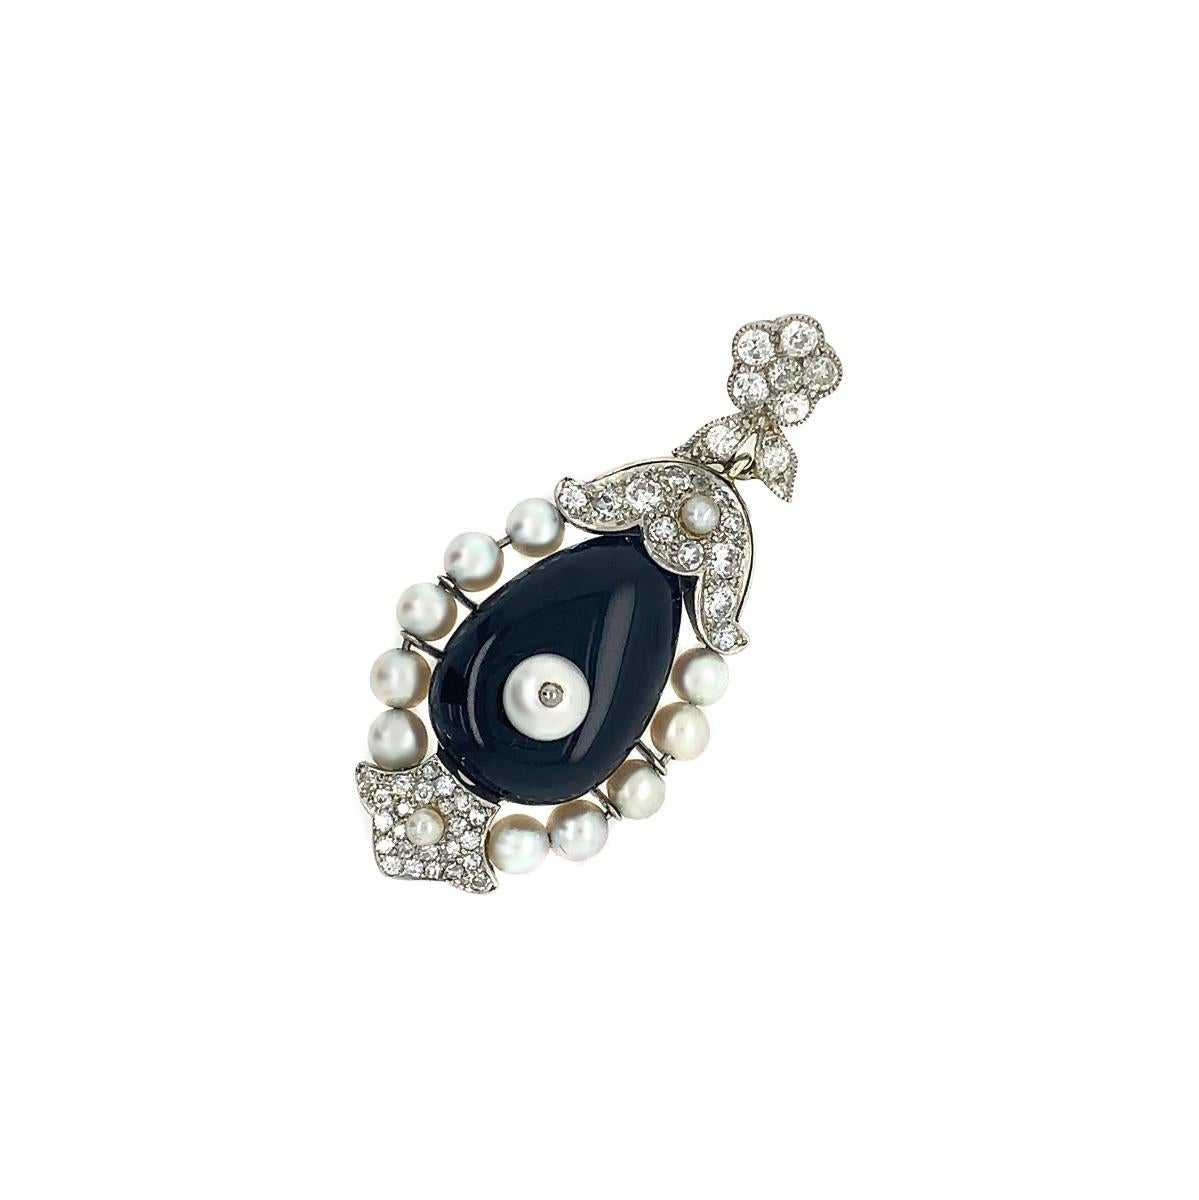 Brand: Cartier
Metal: 18k Gold
Condition: Excellent
 Year Of Manufacture: Circa 1920s
Gemstone: Diamond Set With Onyx
Length: 1.67 inches
Total Item Weight: 8.7 g

SKU#PD-00189